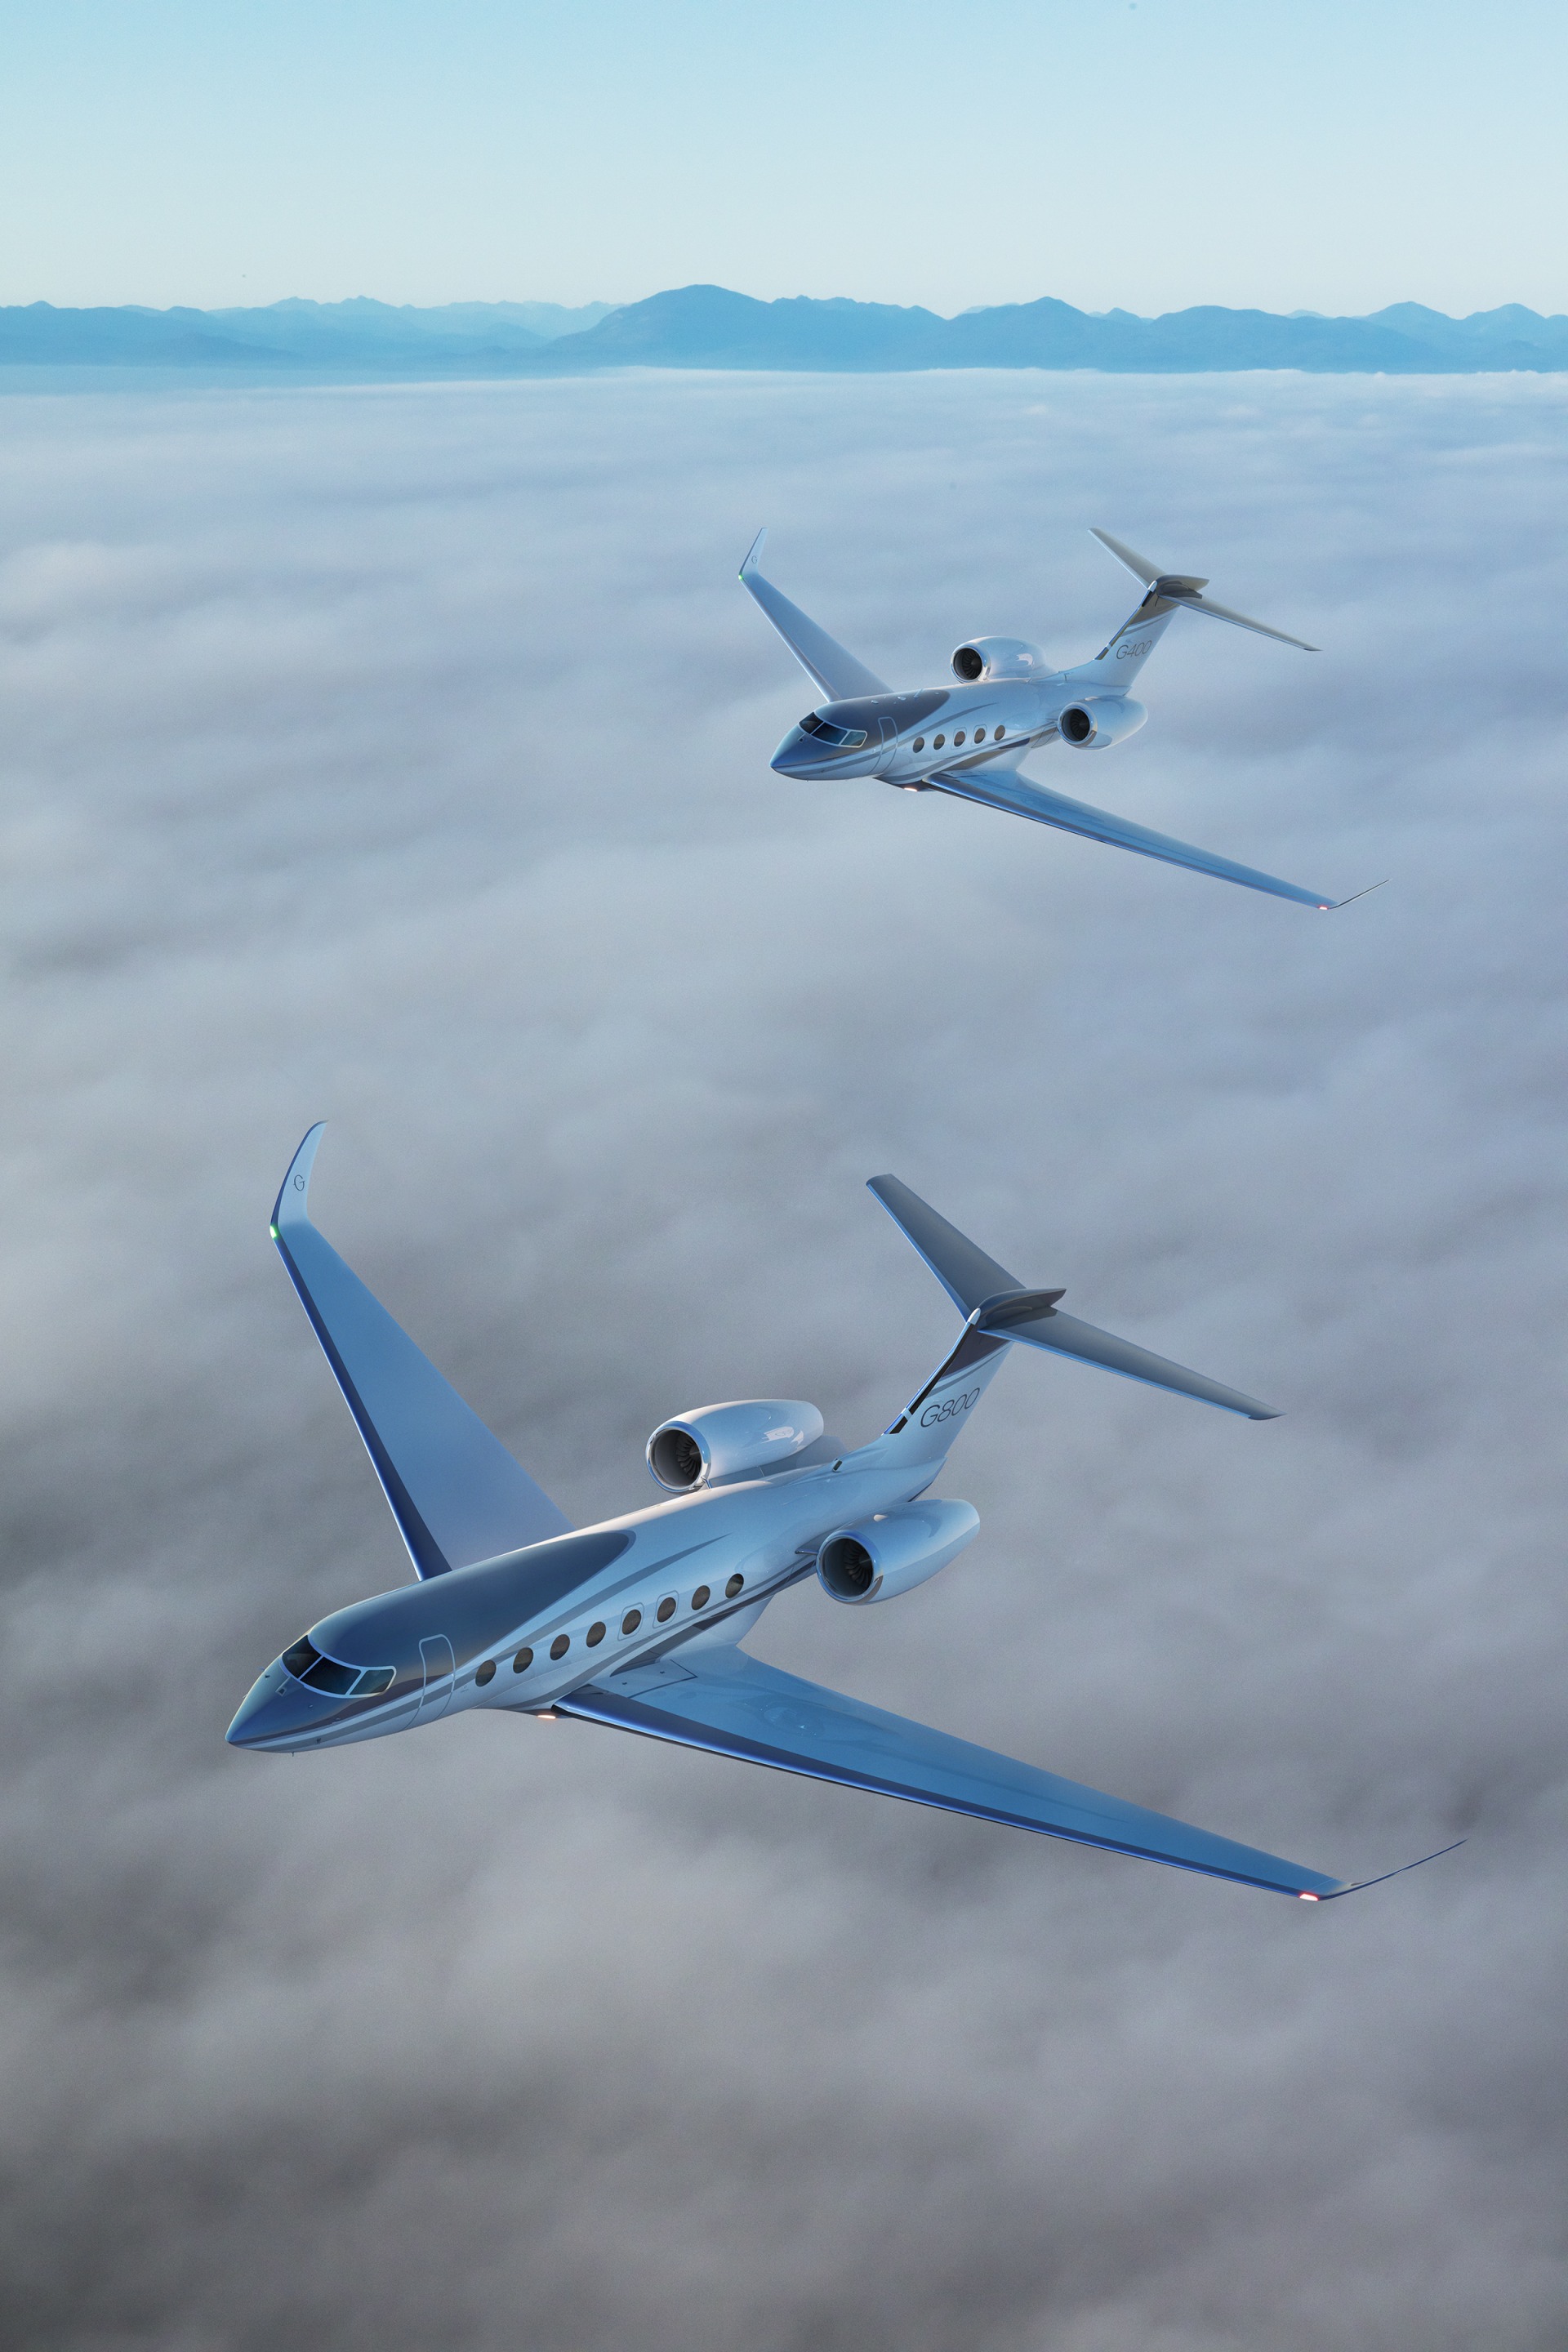 A pair of business jets